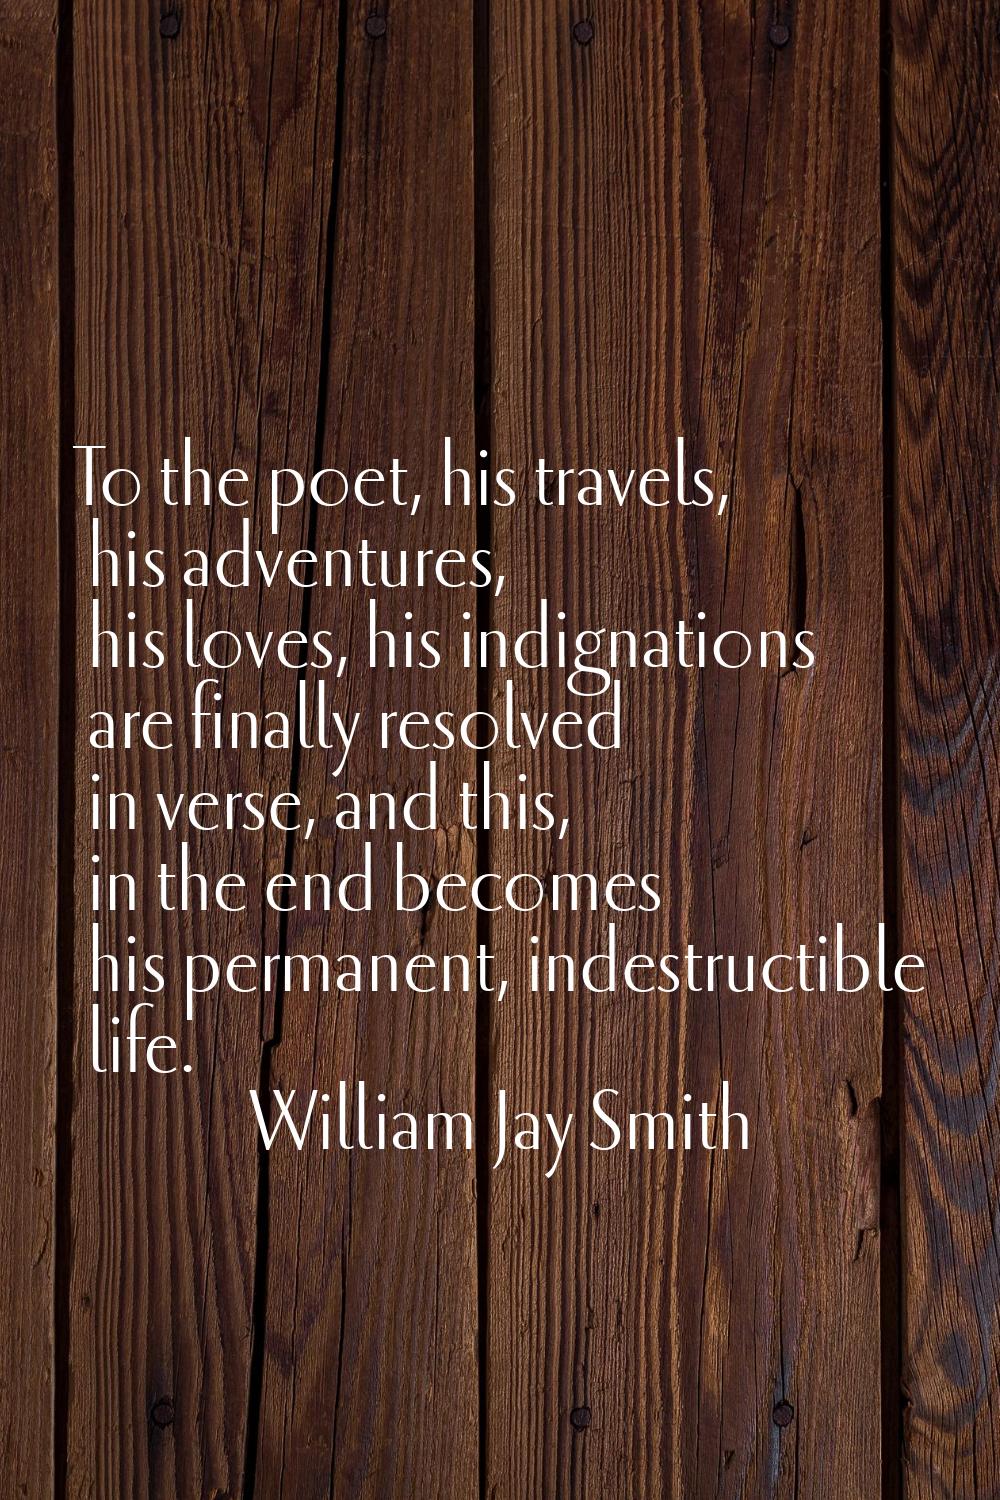 To the poet, his travels, his adventures, his loves, his indignations are finally resolved in verse